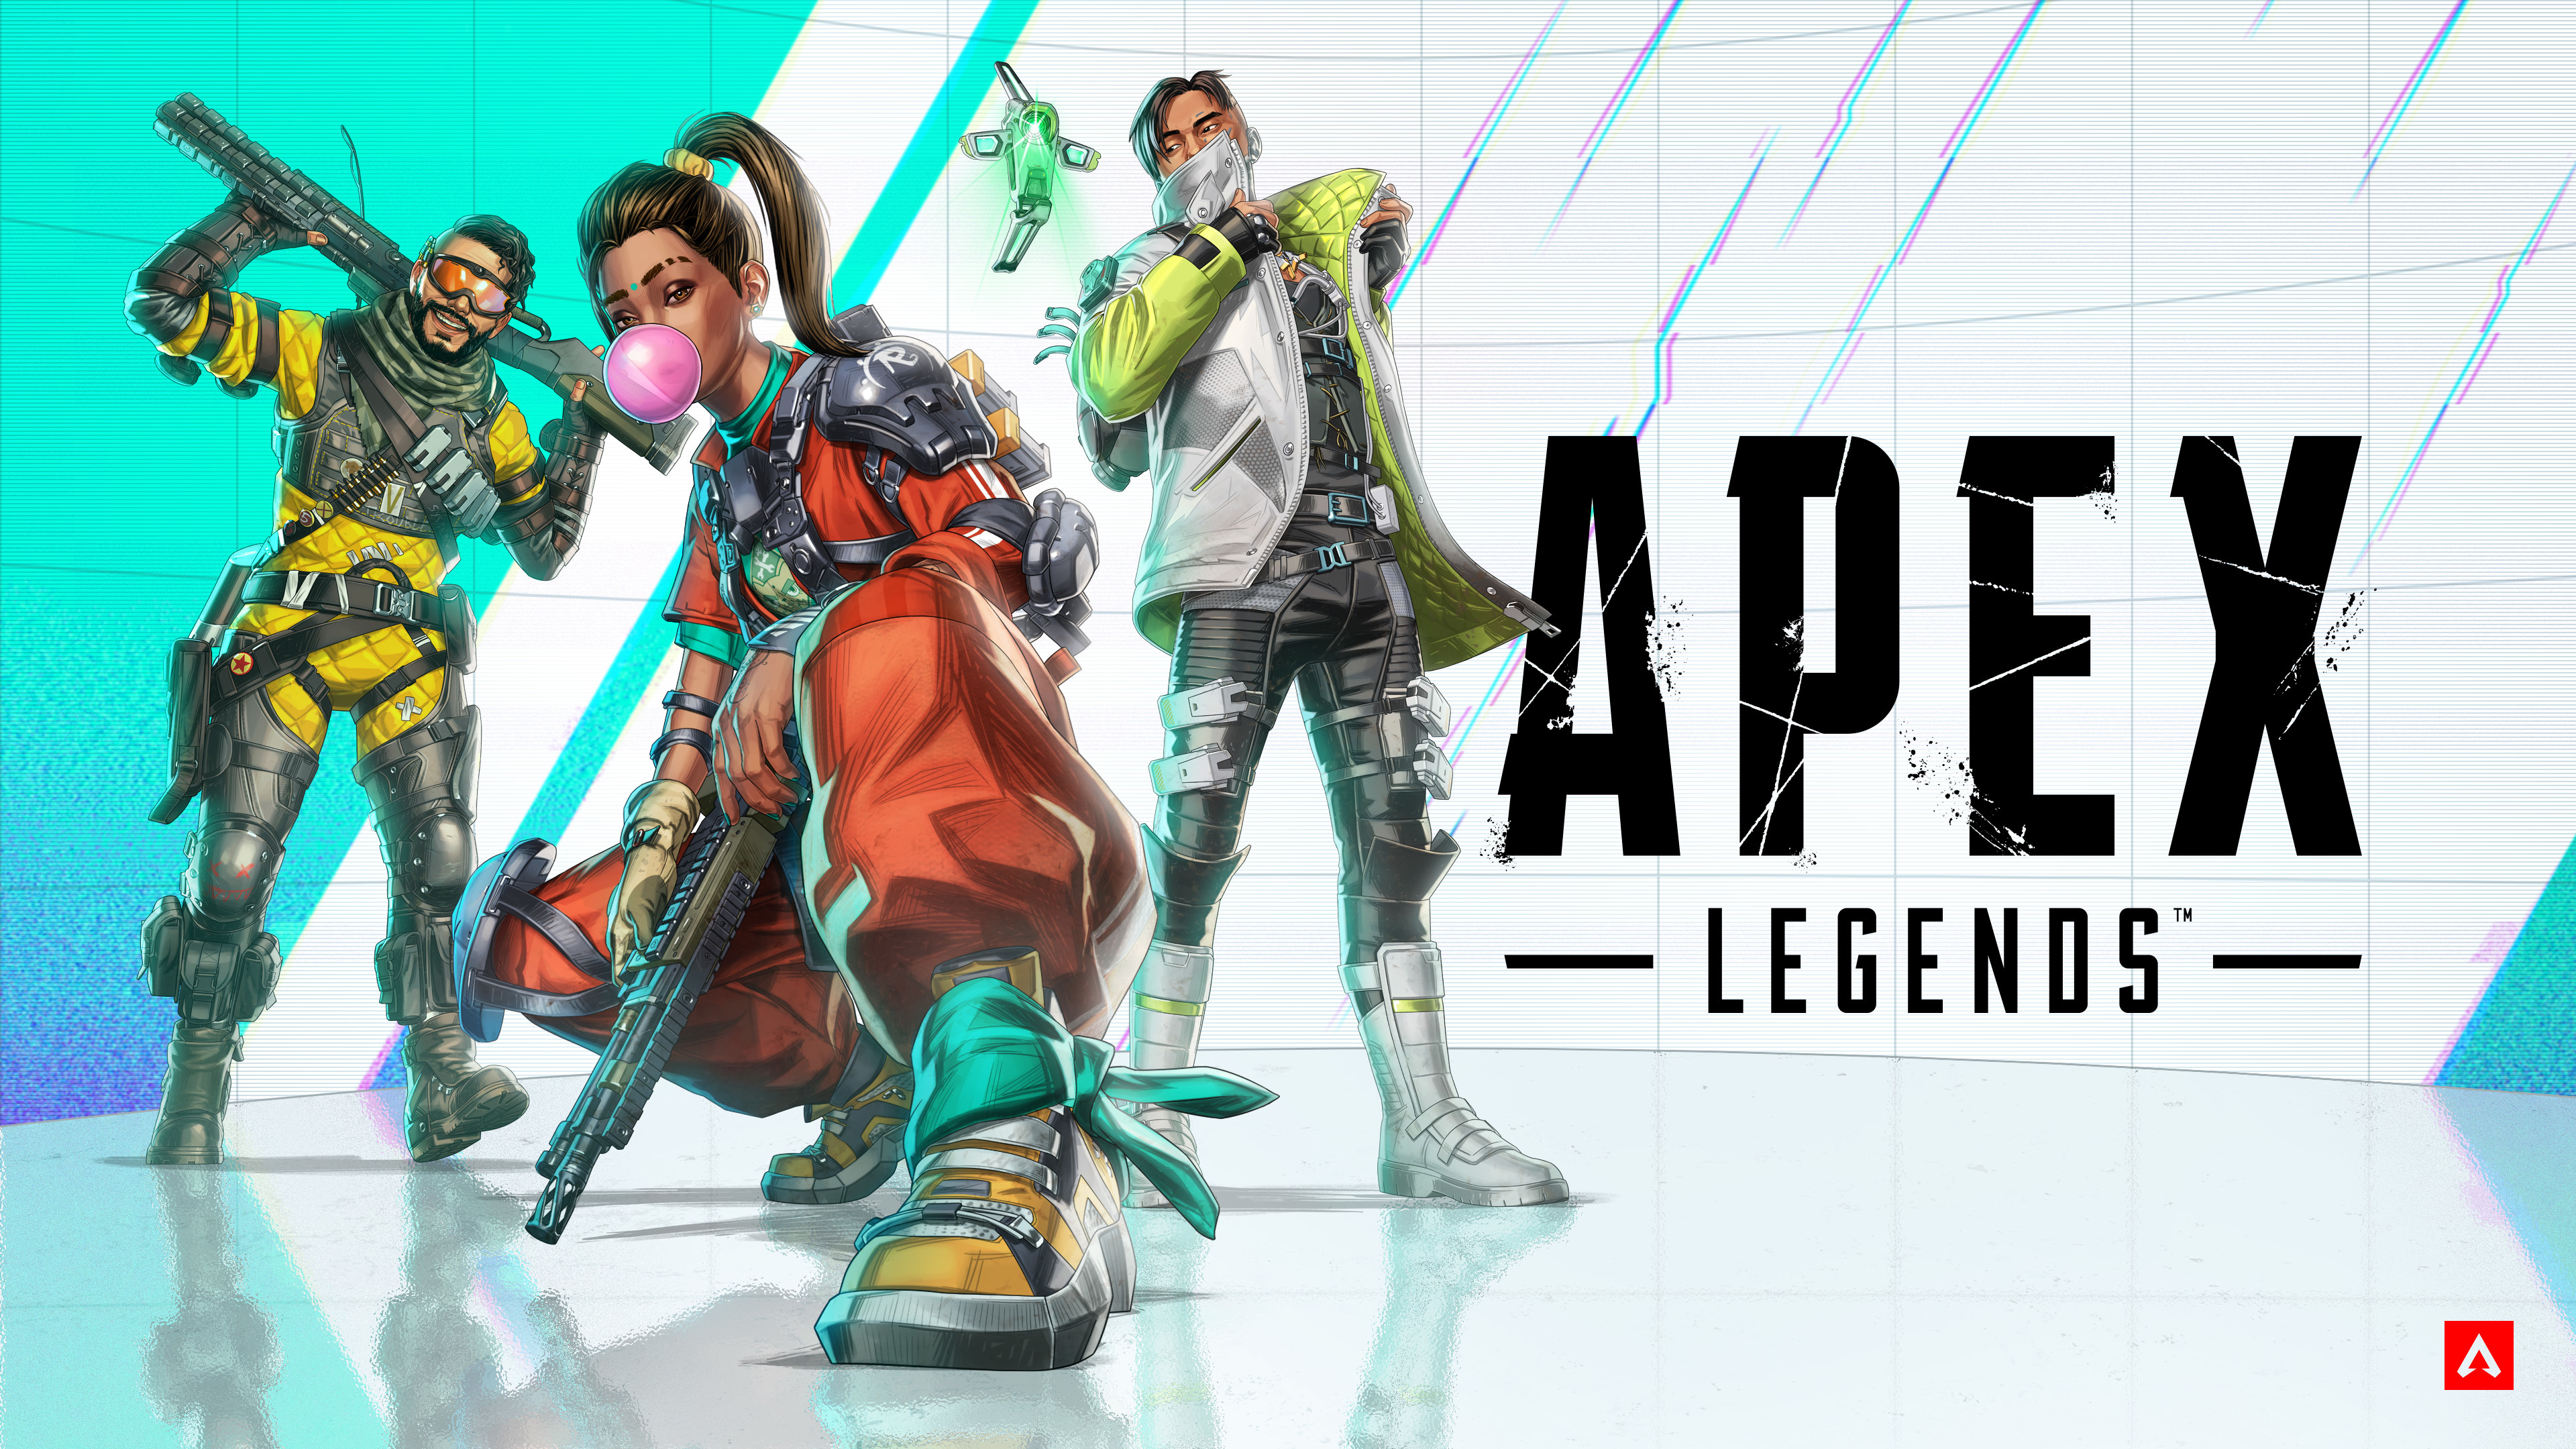 （C） 2024 Electronic Arts Inc. EA, the EA logo, Respawn,  the Respawn logo, and Apex Legends are trademarks of Electronic Arts Inc.